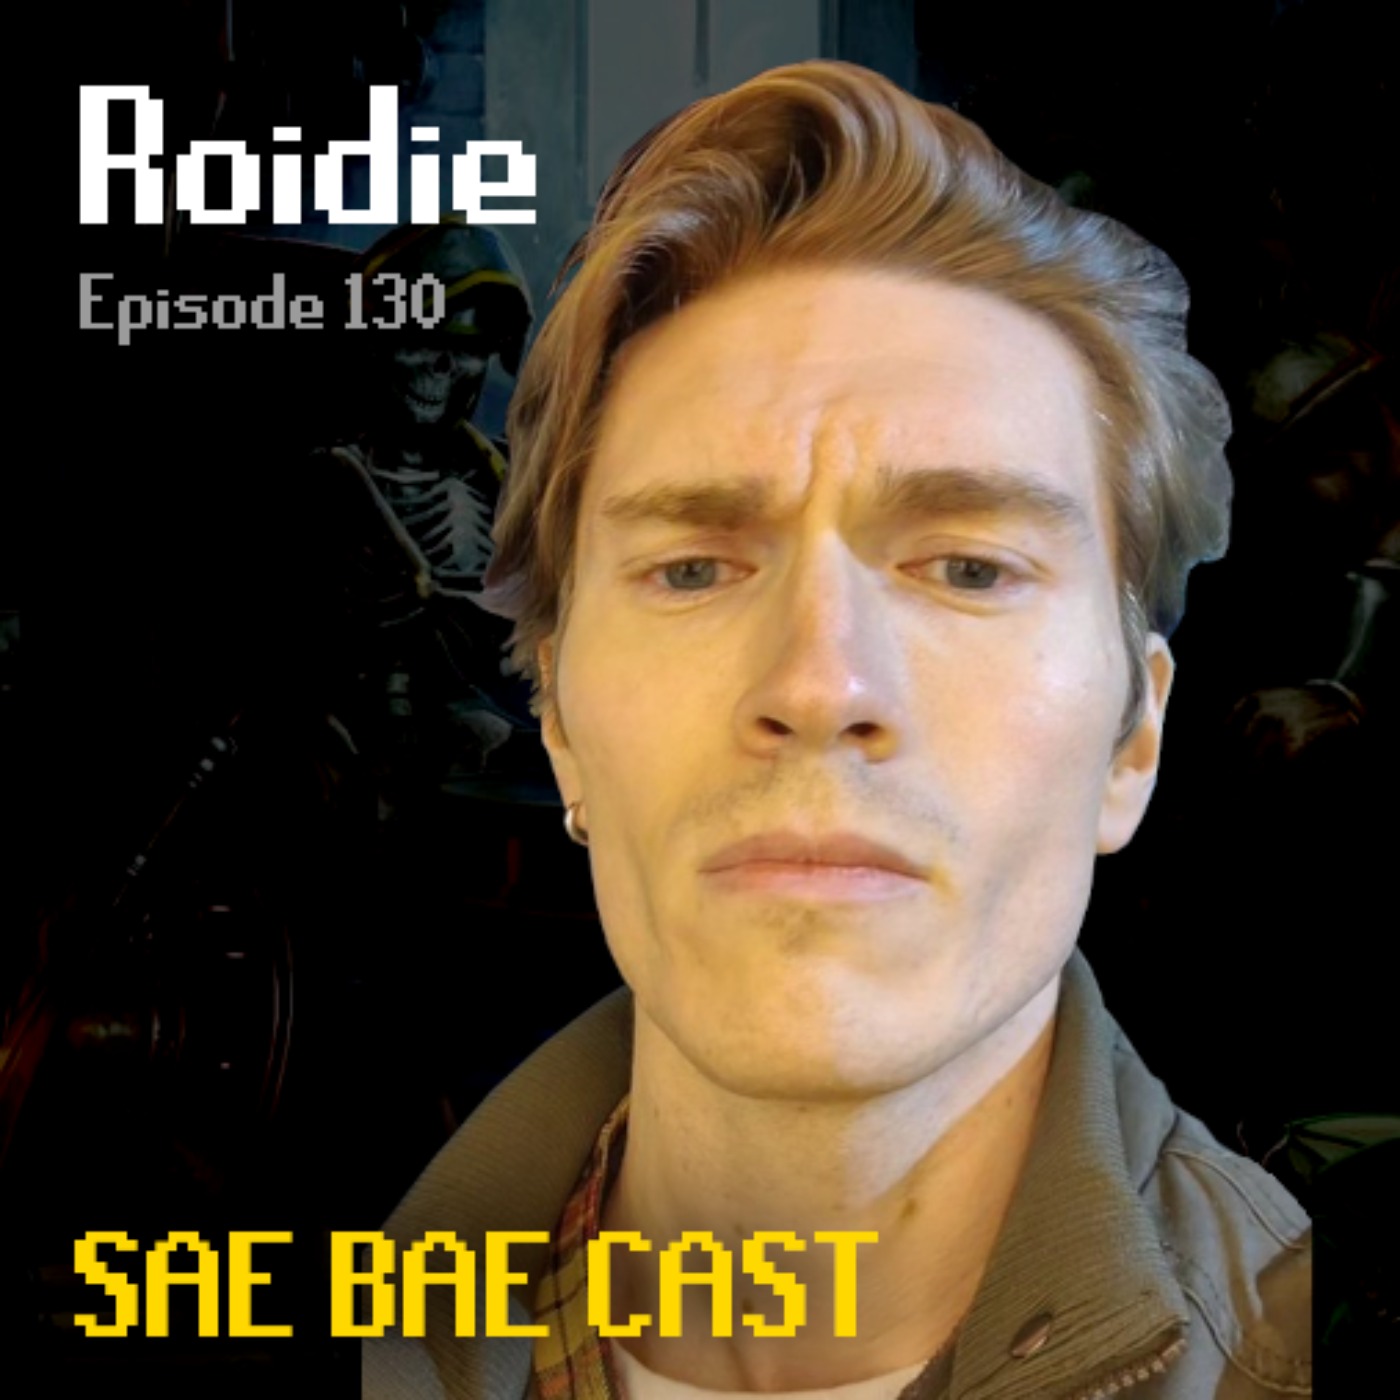 Roidie - Farmers, Bodybuilding, Collection Log, Religion, Meaning of Life | Sae Bae Cast 130